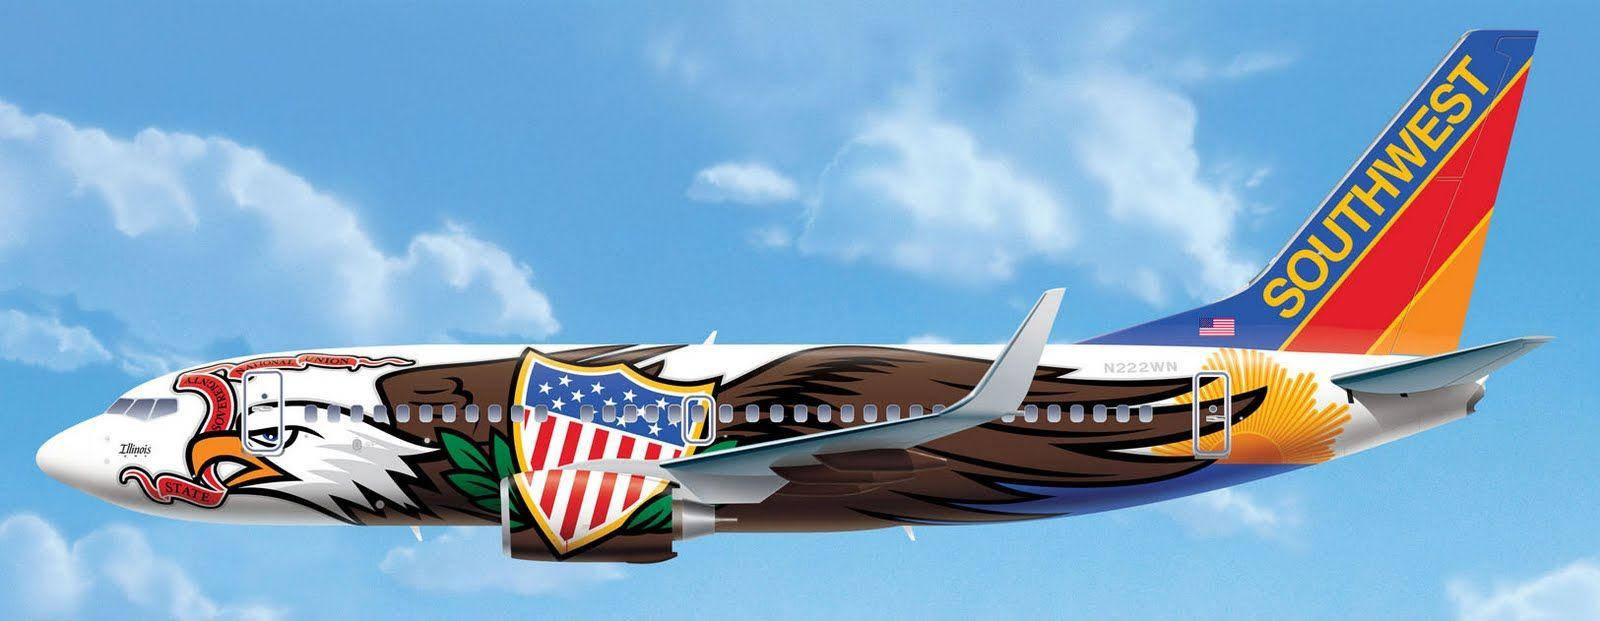 Eagle Airplane Southwest Airlines Wallpaper